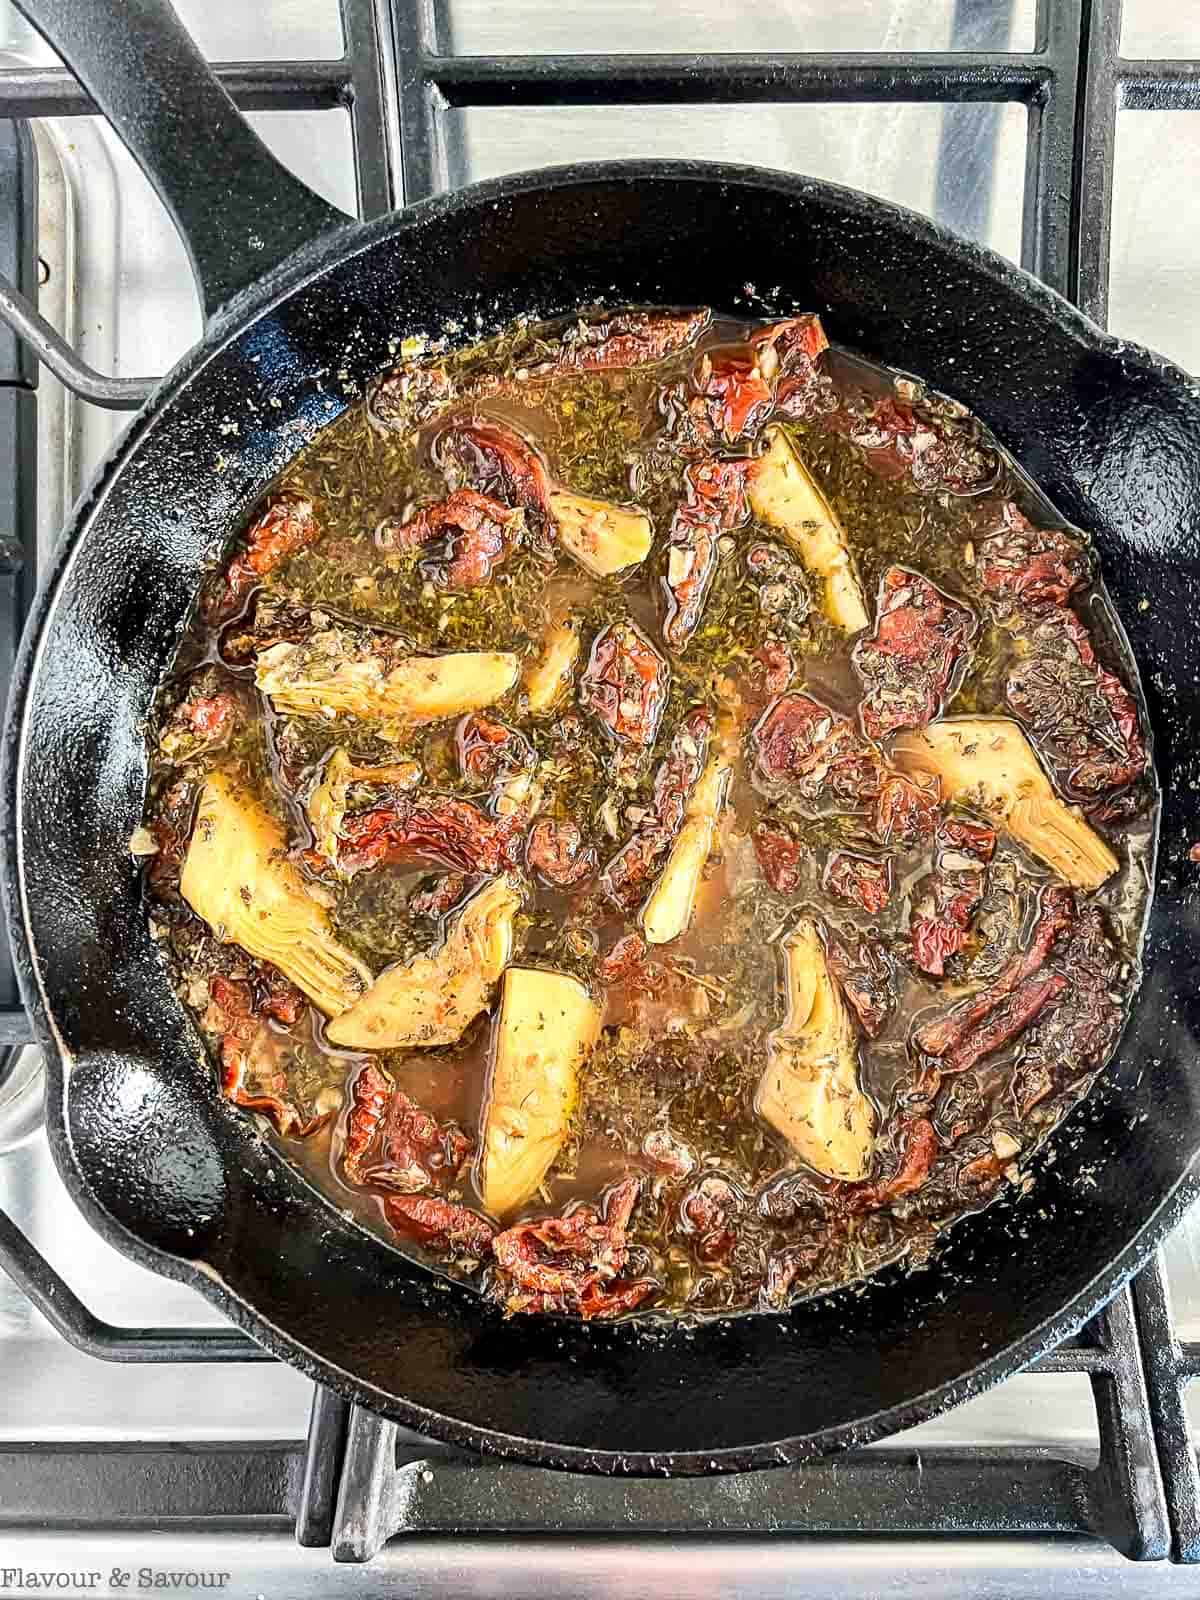 A cast iron pan with garlic, tomatoes, artichokes, wine and herbs.